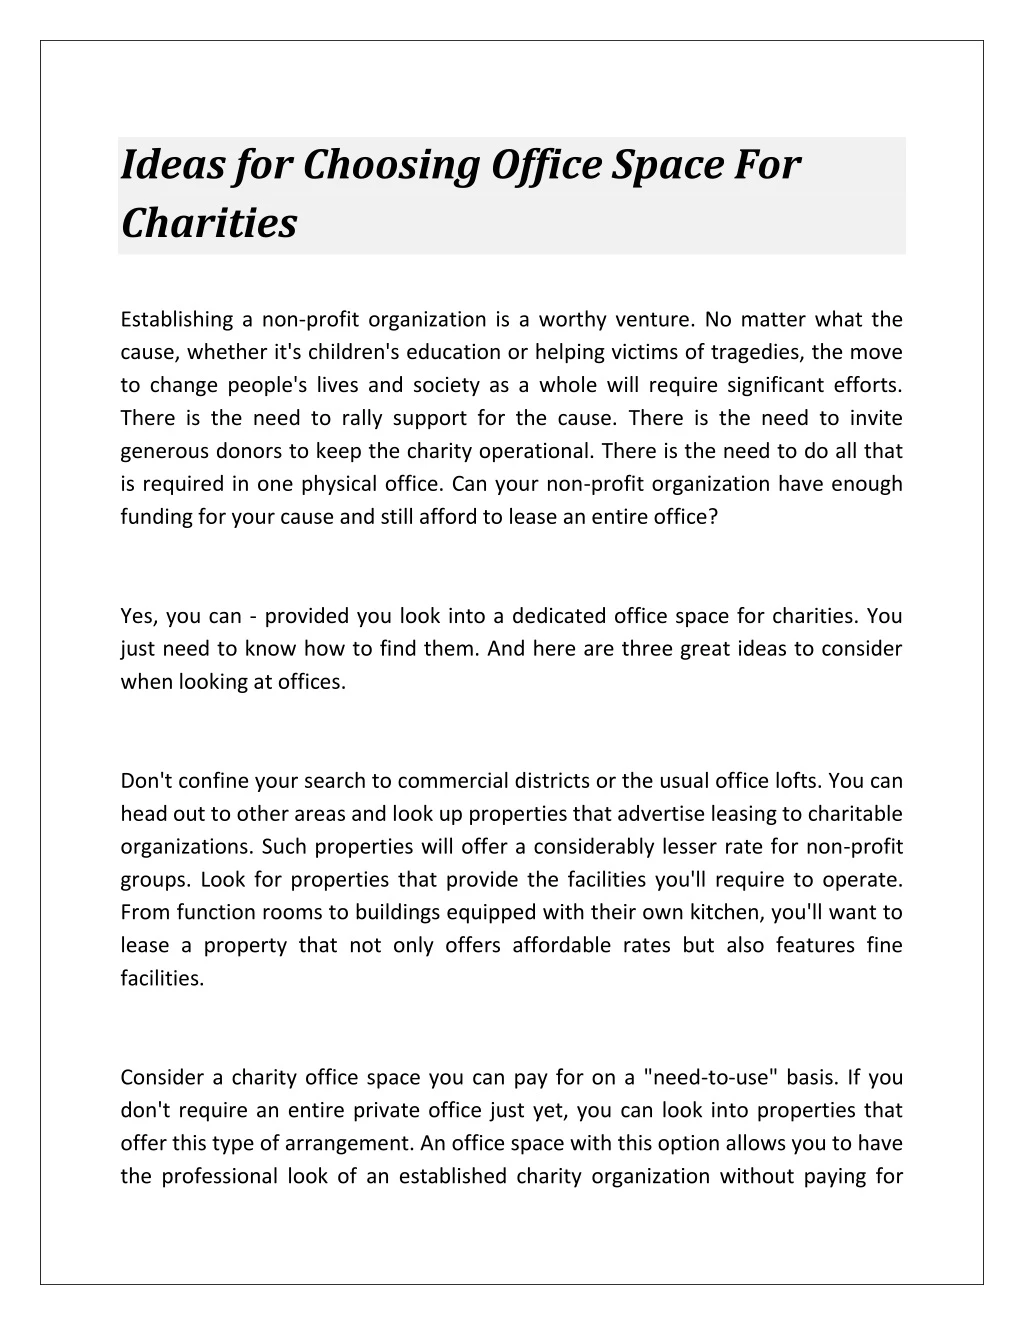 ideas for choosing office space for charities